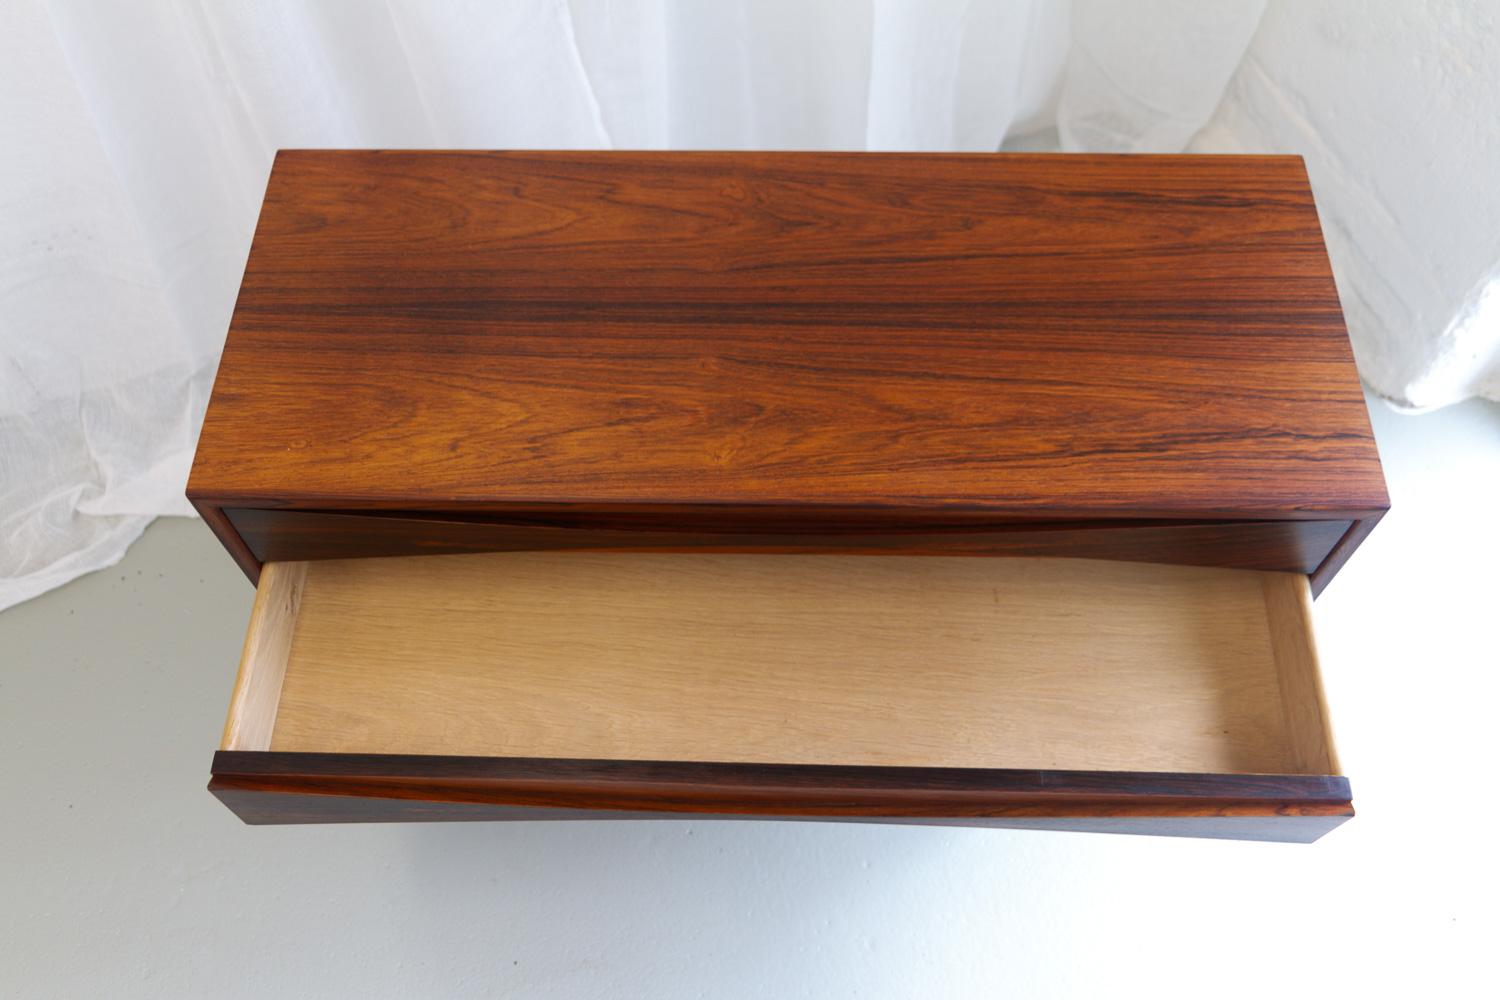 Danish Modern Rosewood Bedside Chest by Niels Clausen for NC Møbler, 1960s. For Sale 1